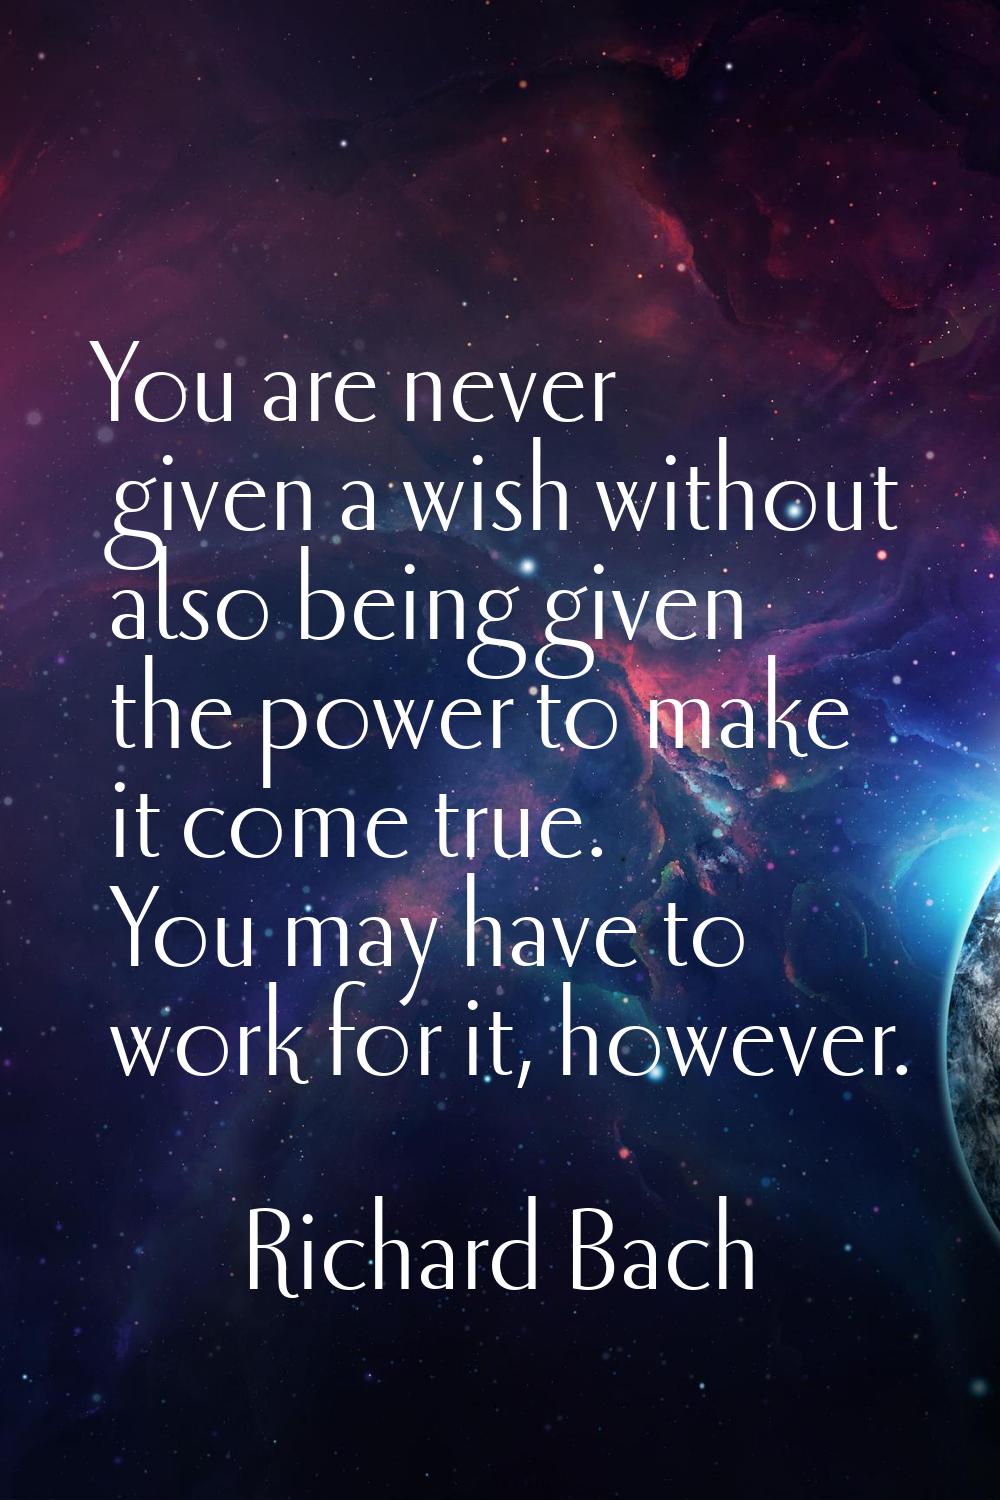 You are never given a wish without also being given the power to make it come true. You may have to